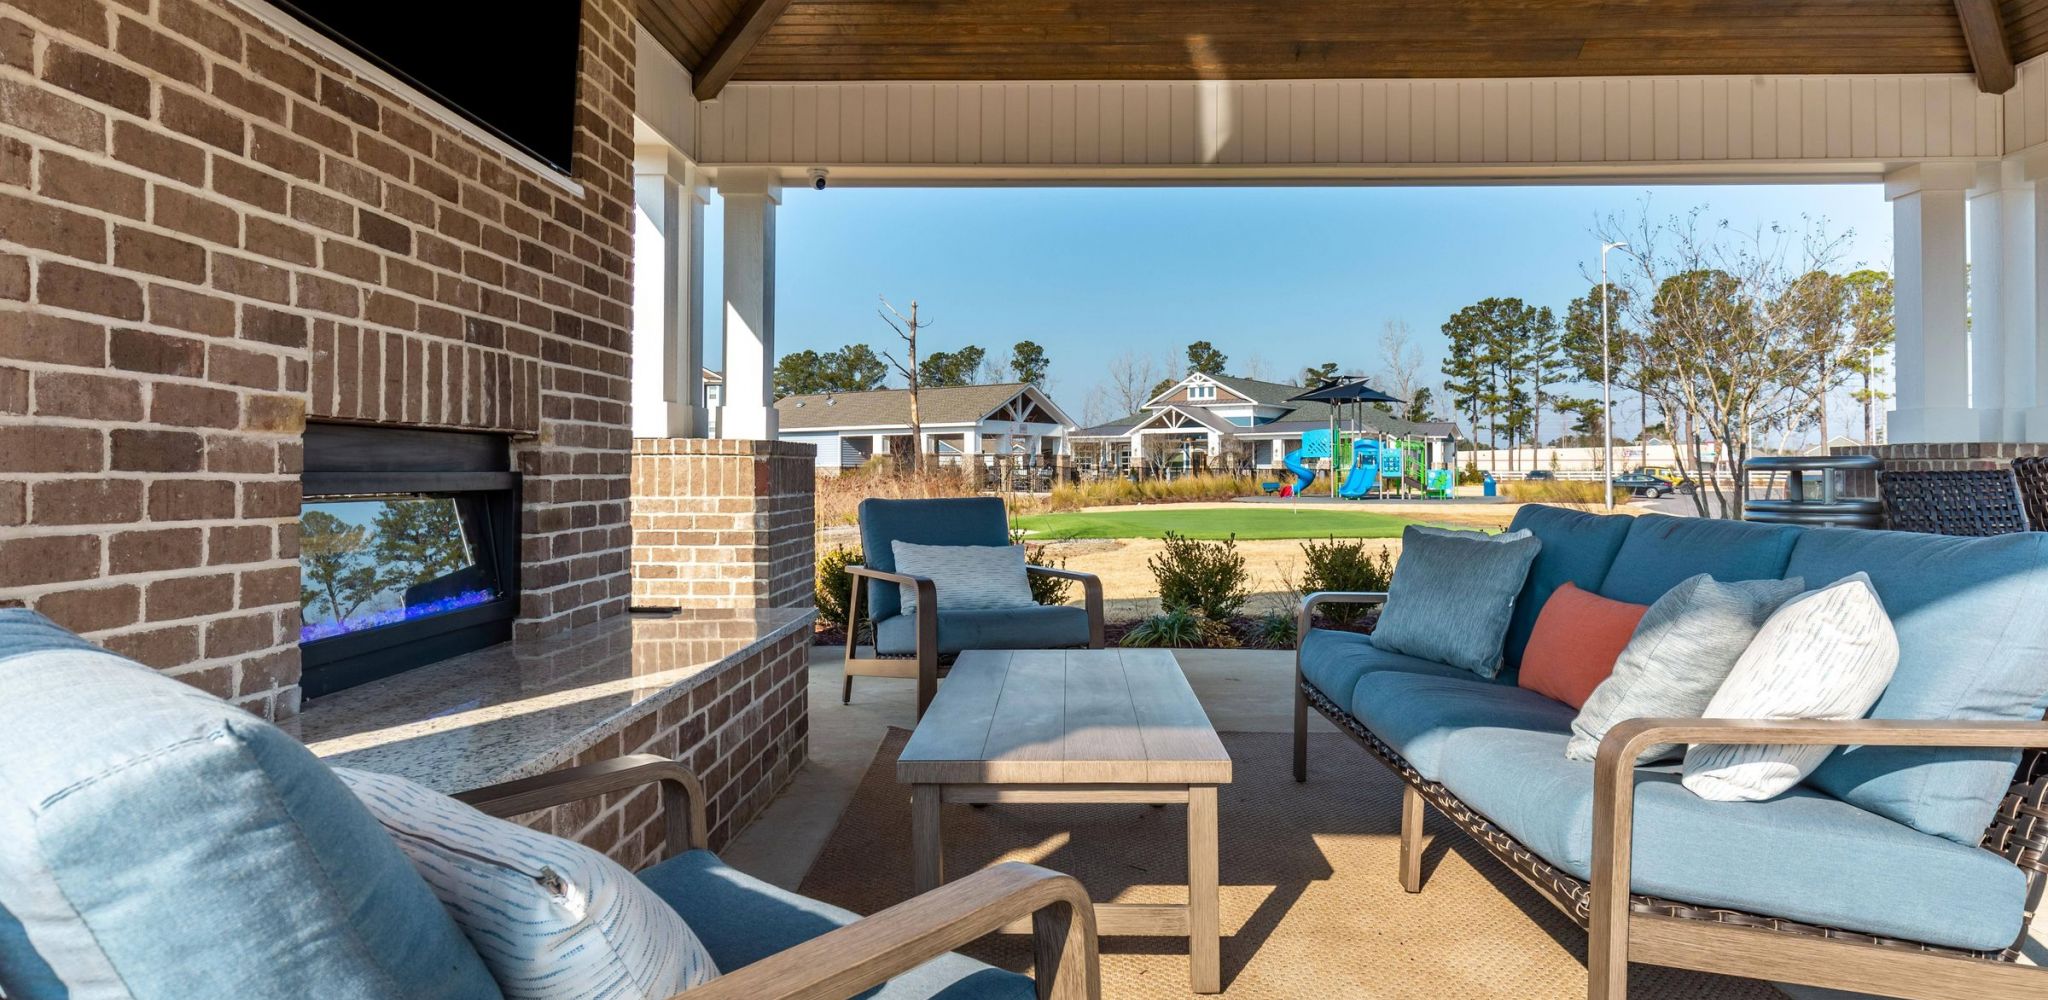 Hawthorne Waterside outdoor covered patio area with a cozy fireplace, comfortable seating, and a clear view of the playground.